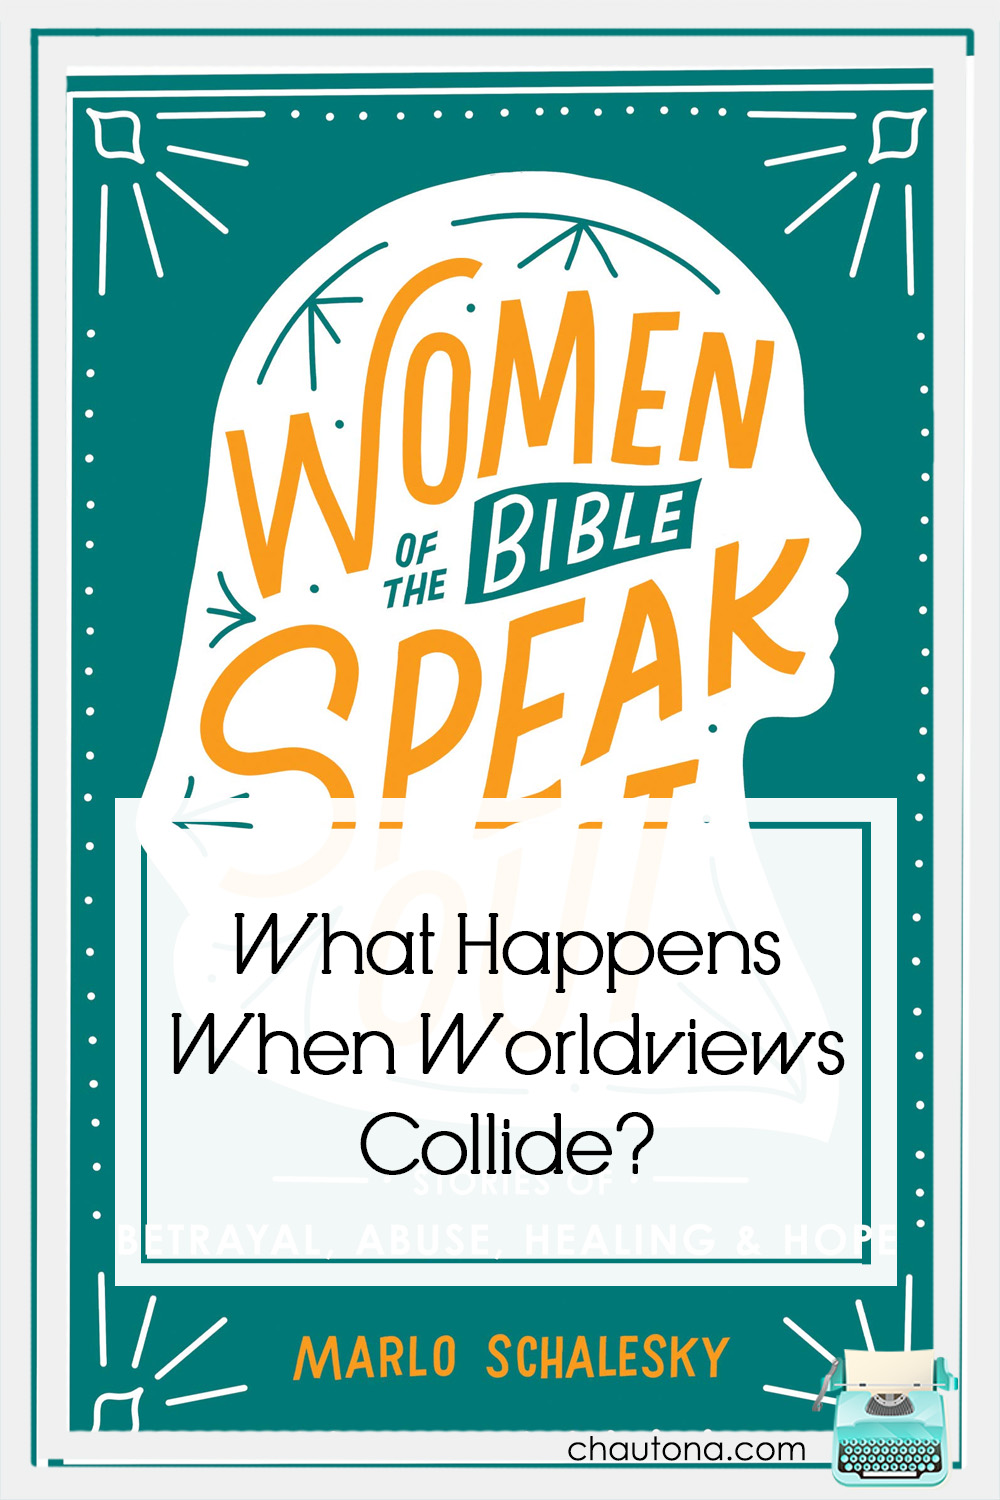 Women of the Bible Speak Out offers a look into just how little has changed over the course of human history. Sinners sin, and pain follows. via @chautonahavig